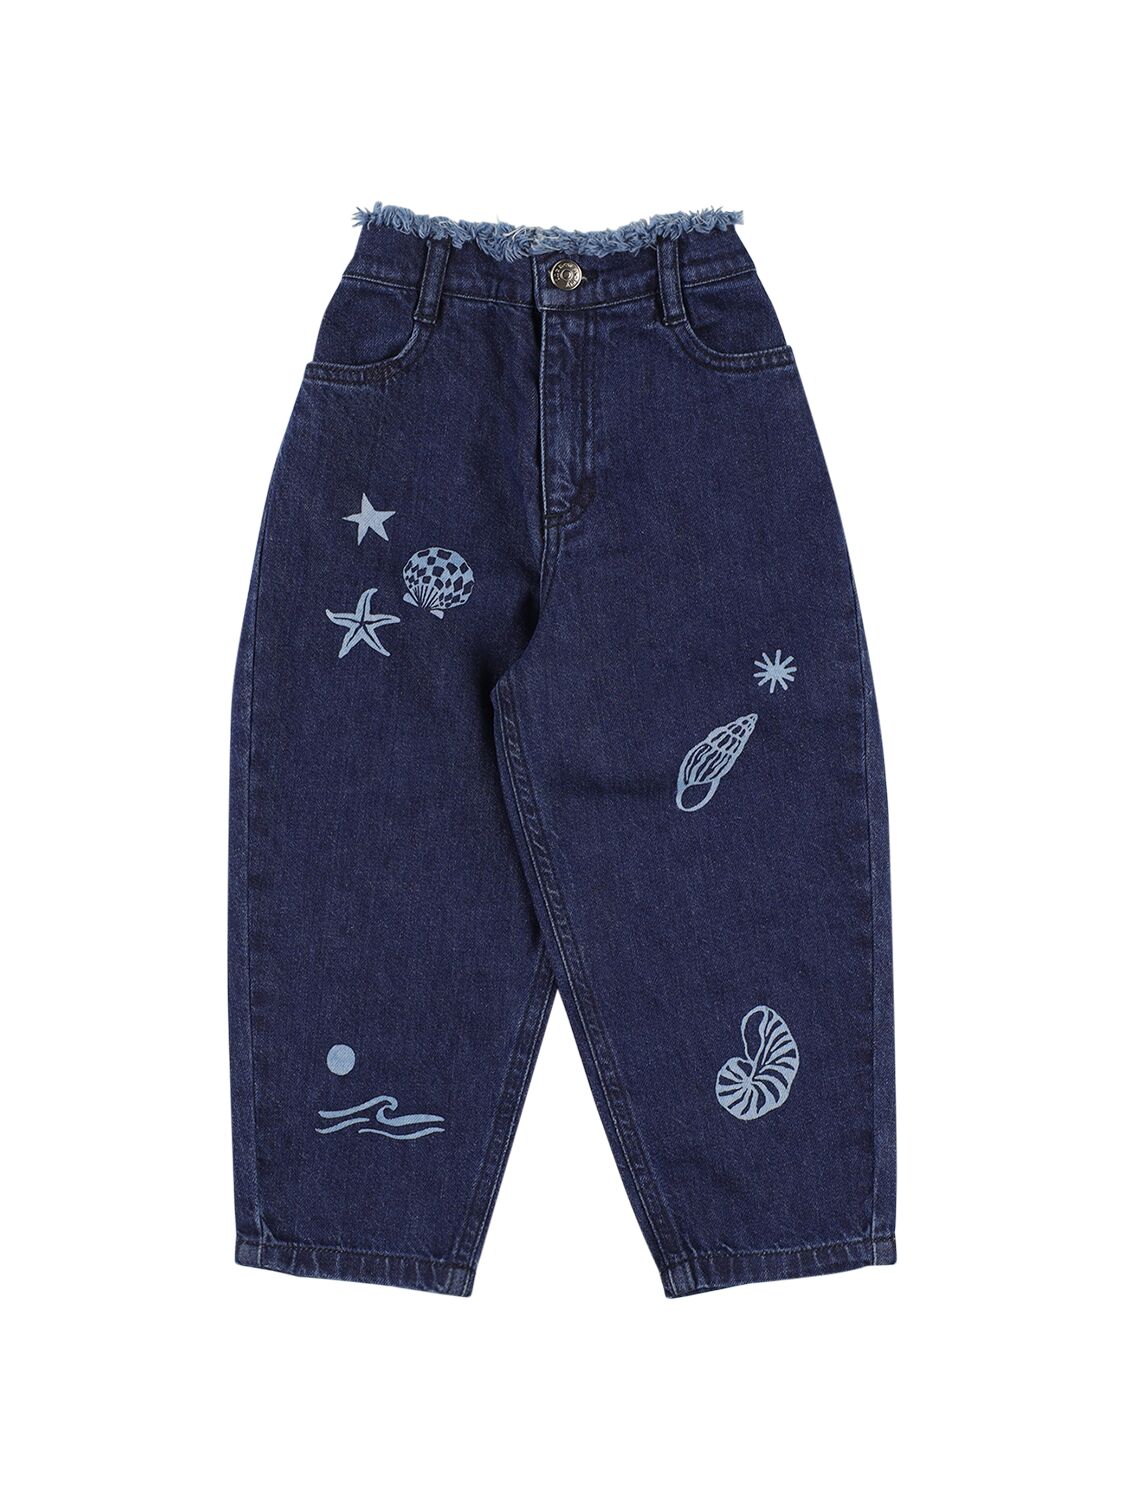 Image of Embroidered Bci Cotton Jeans